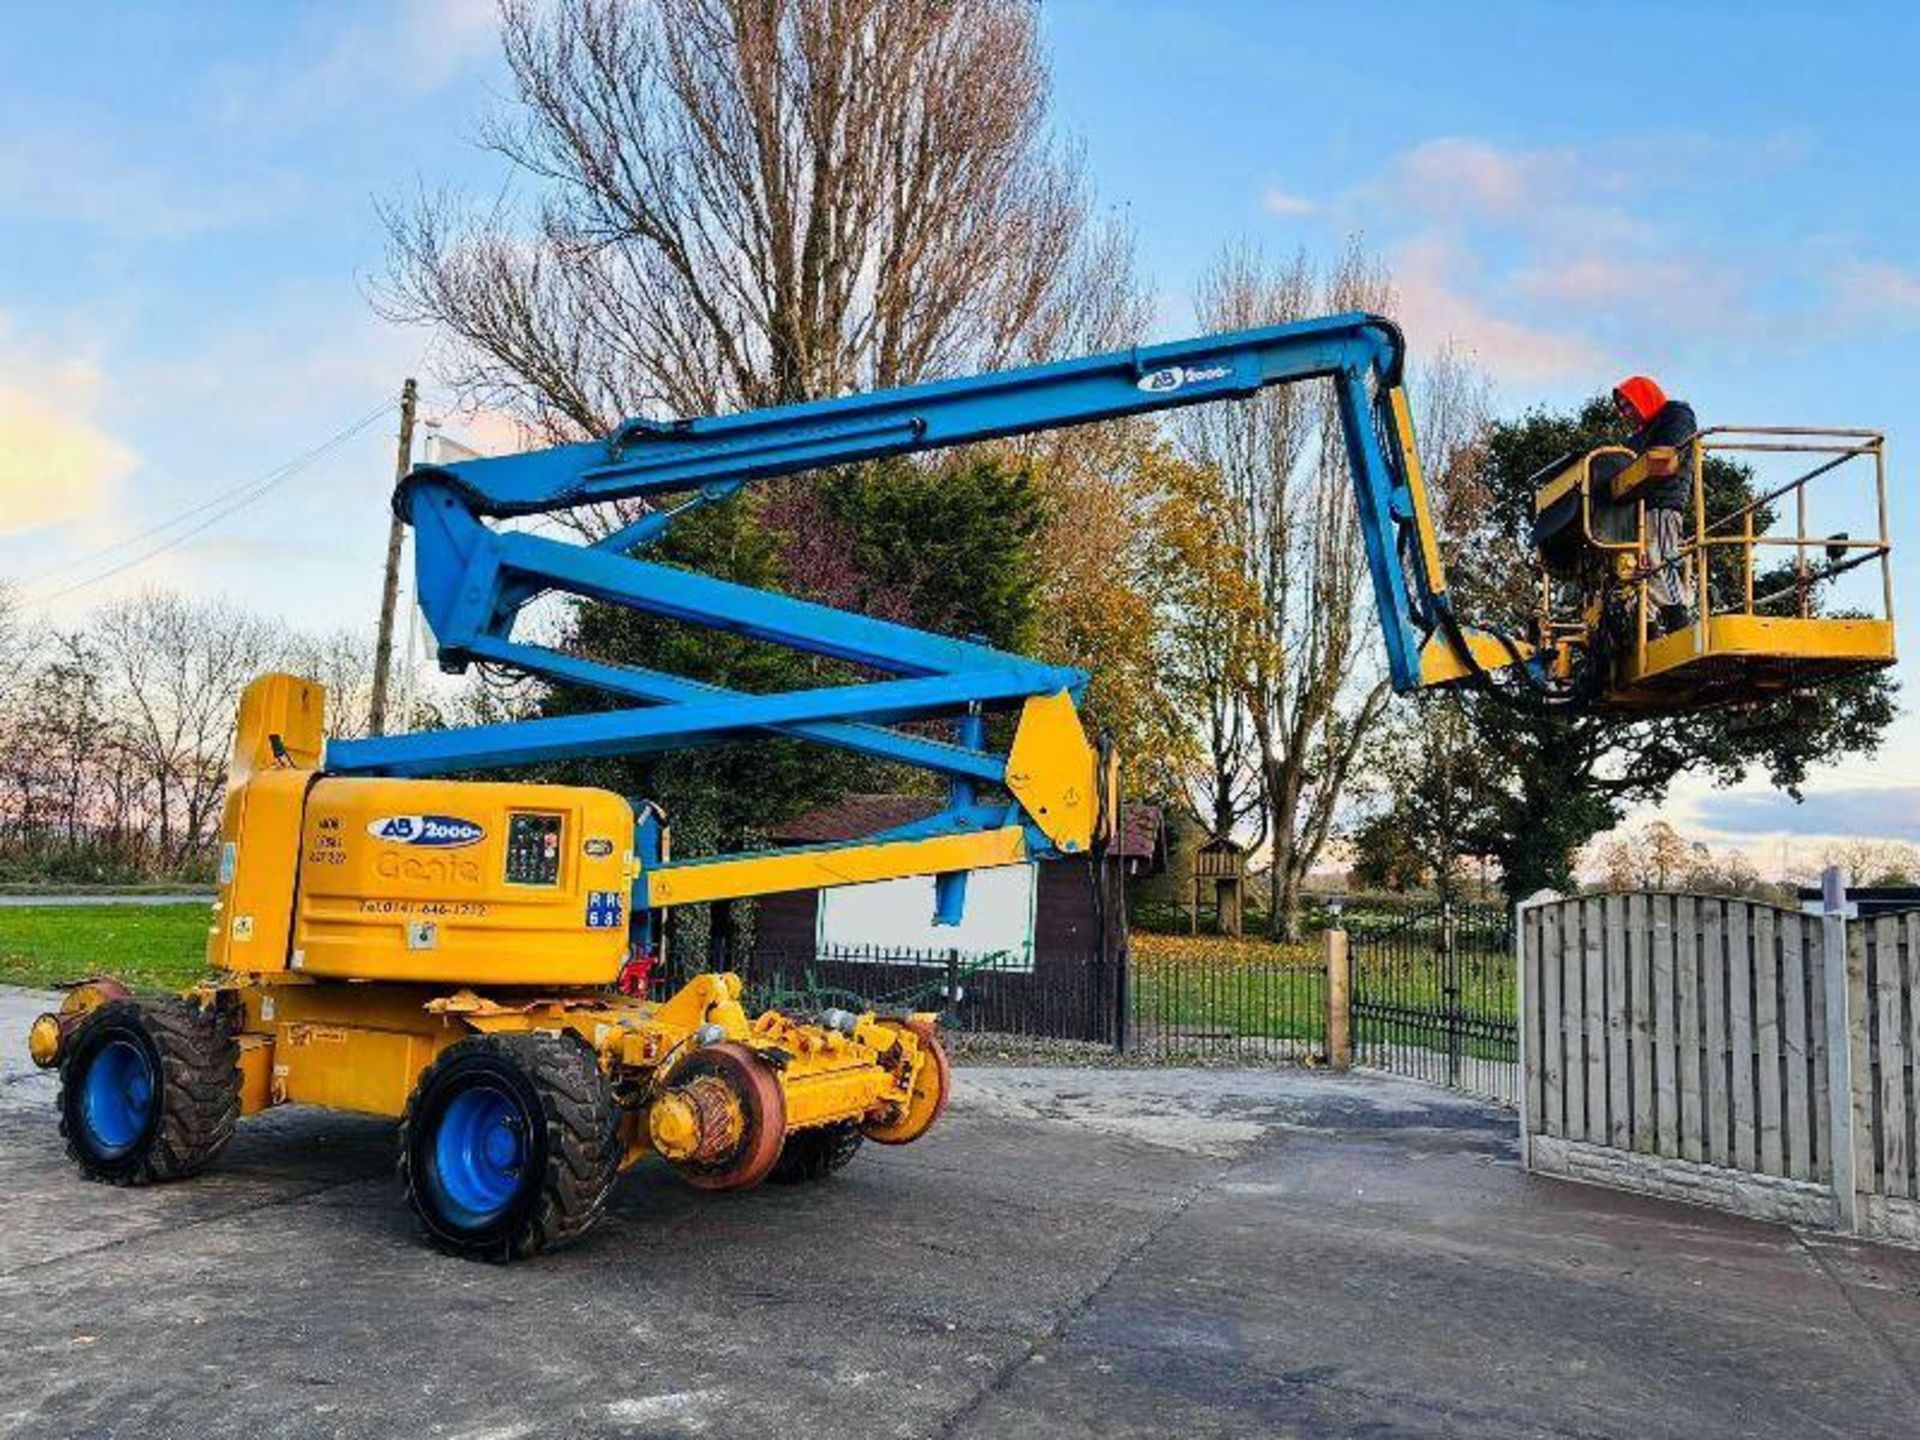 GENIE Z-60/34 4WD ARTICULATED RAIL ROAD BOOM LIFT * 20.3 METER REACH *. - Image 14 of 15